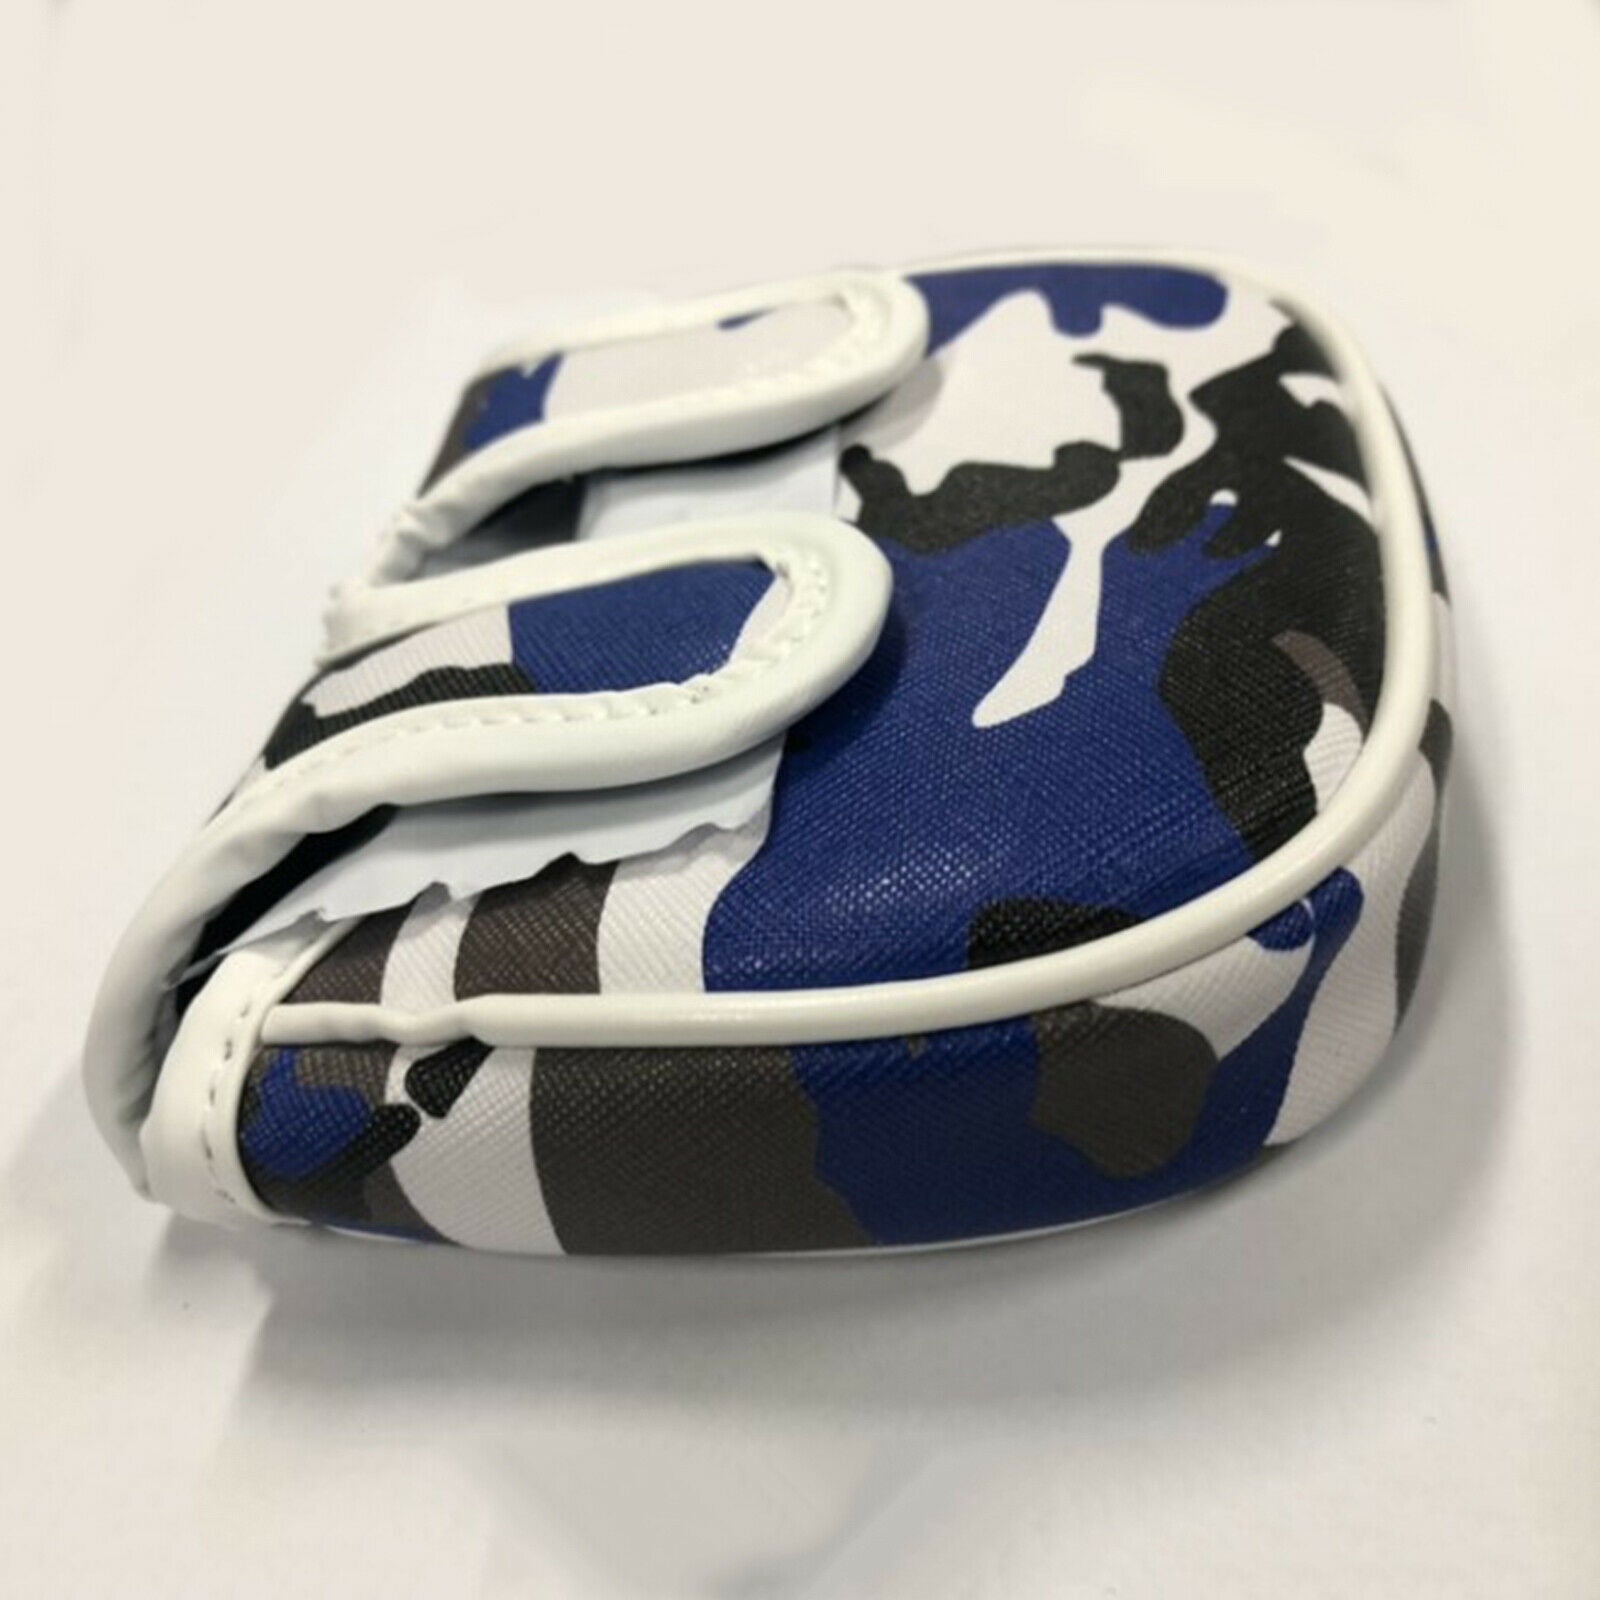 Camouflage Blue Golf Mallet Putter Cover Headcover, Universal Fits